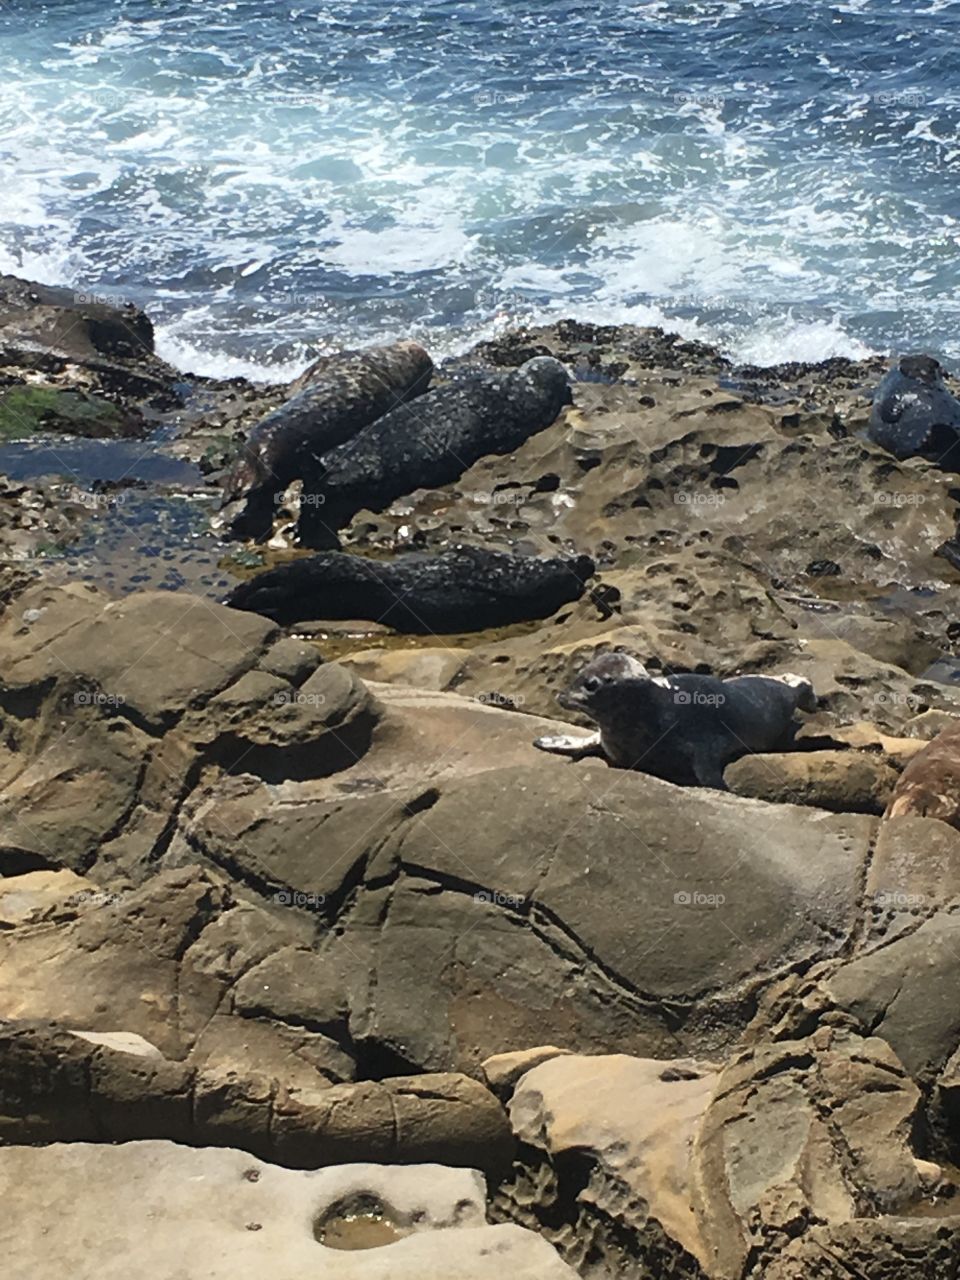 Seals on the beach in summer.